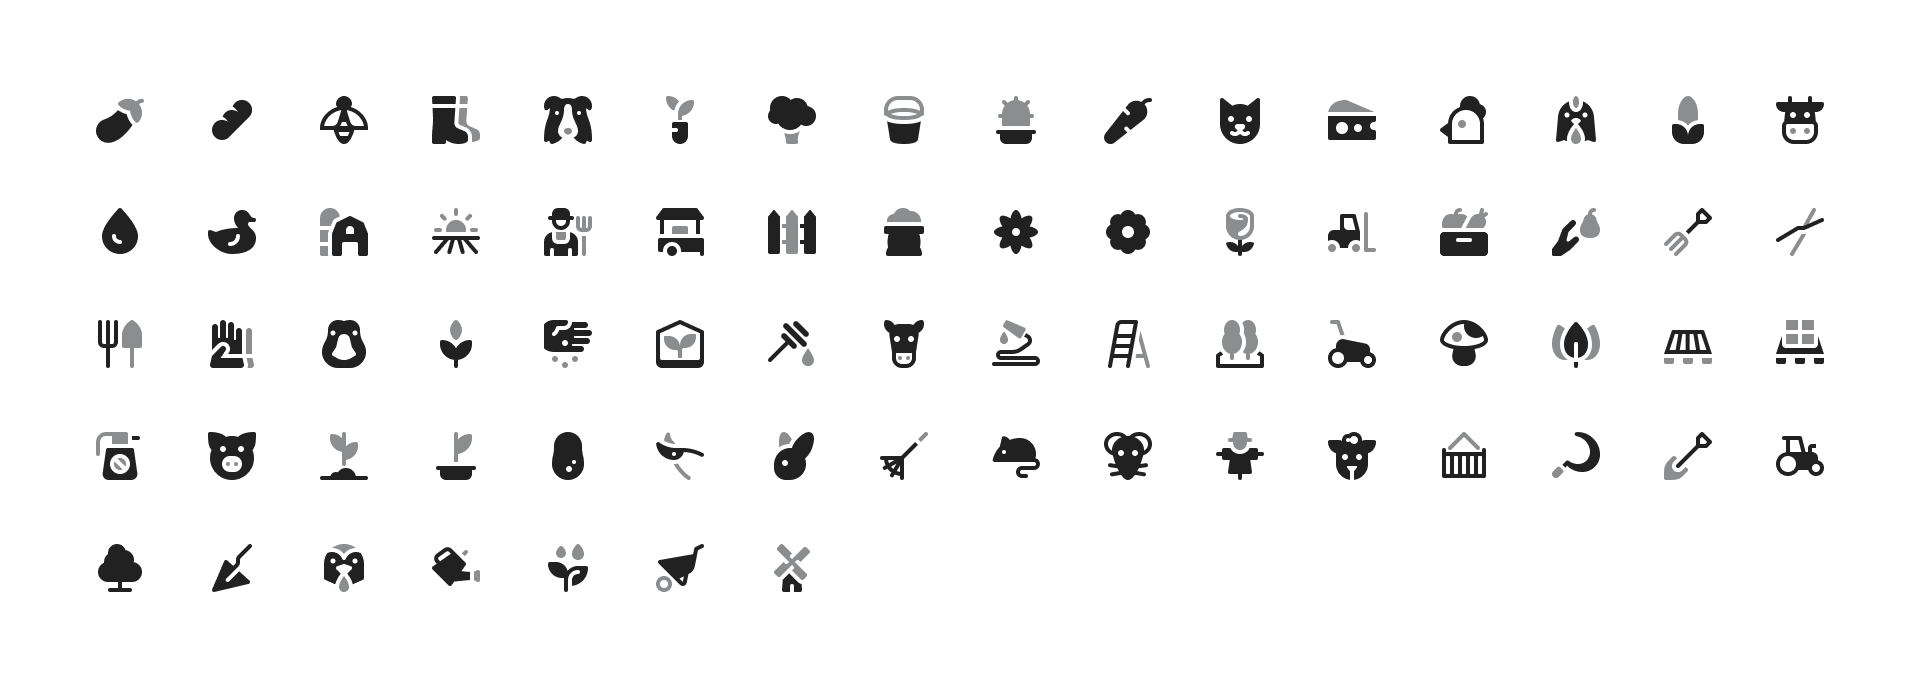 Farming and Gardening Icons